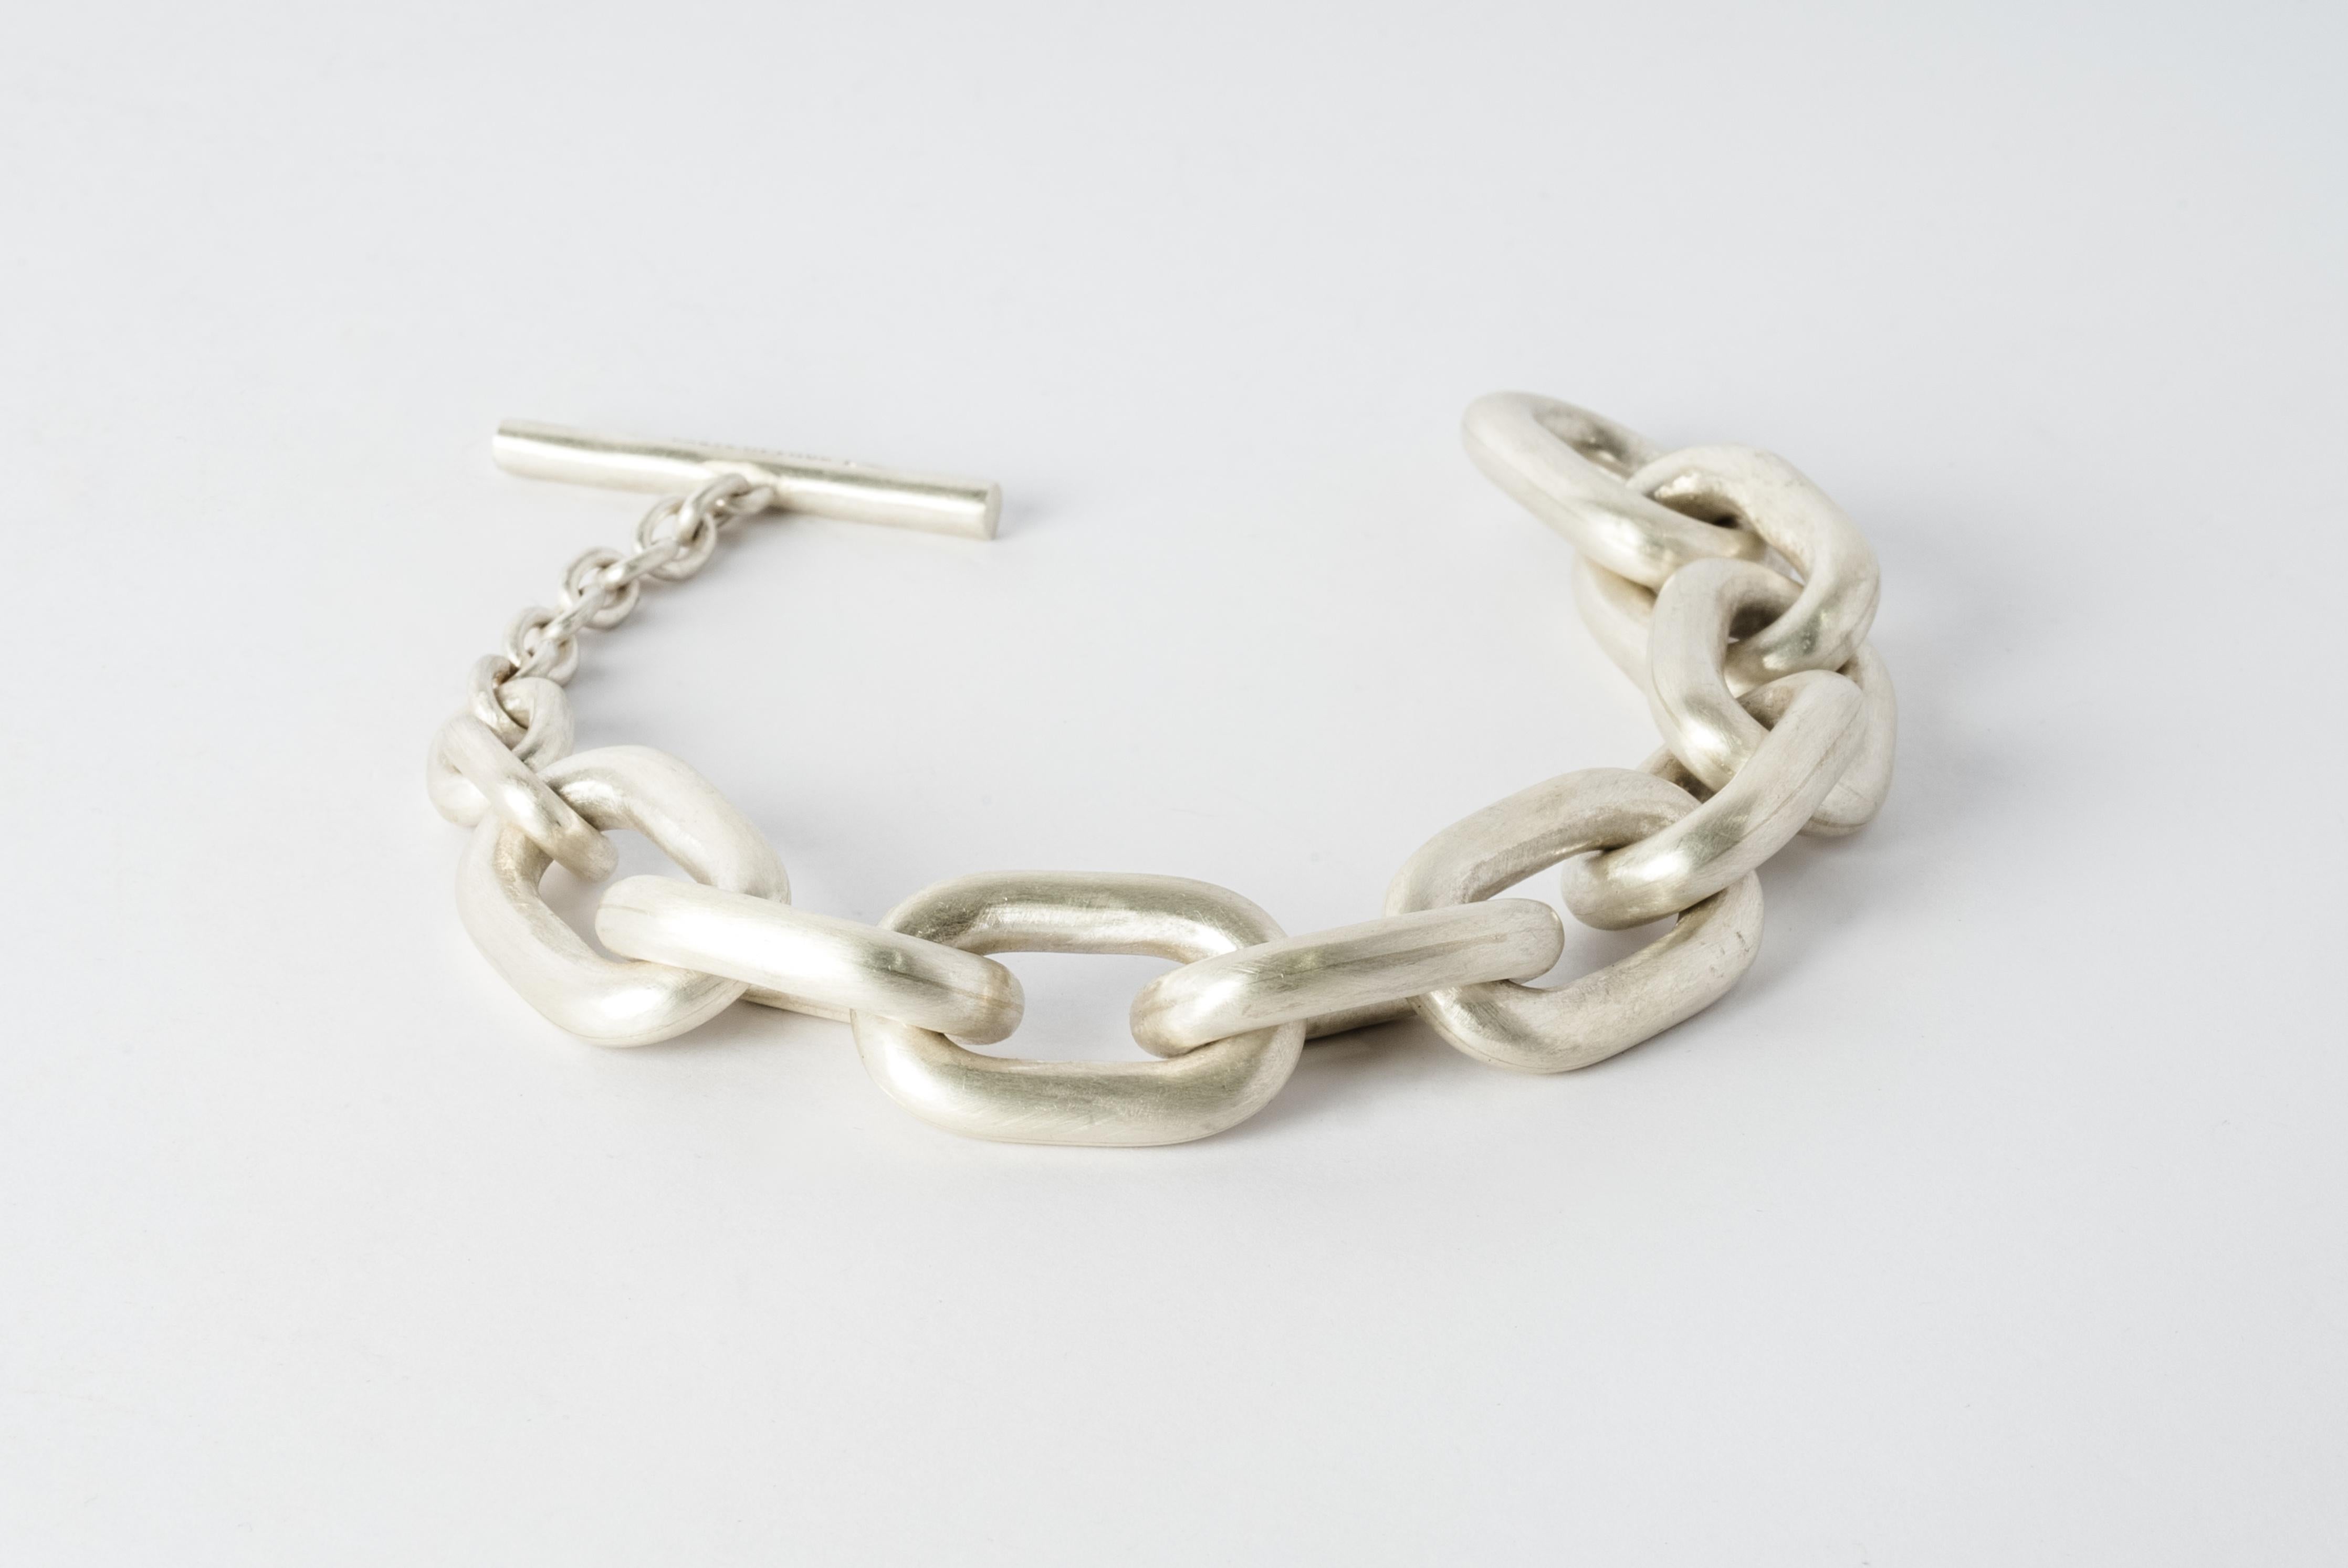 Women's or Men's Toggle Chain Bracelet (Small Links, MA) For Sale